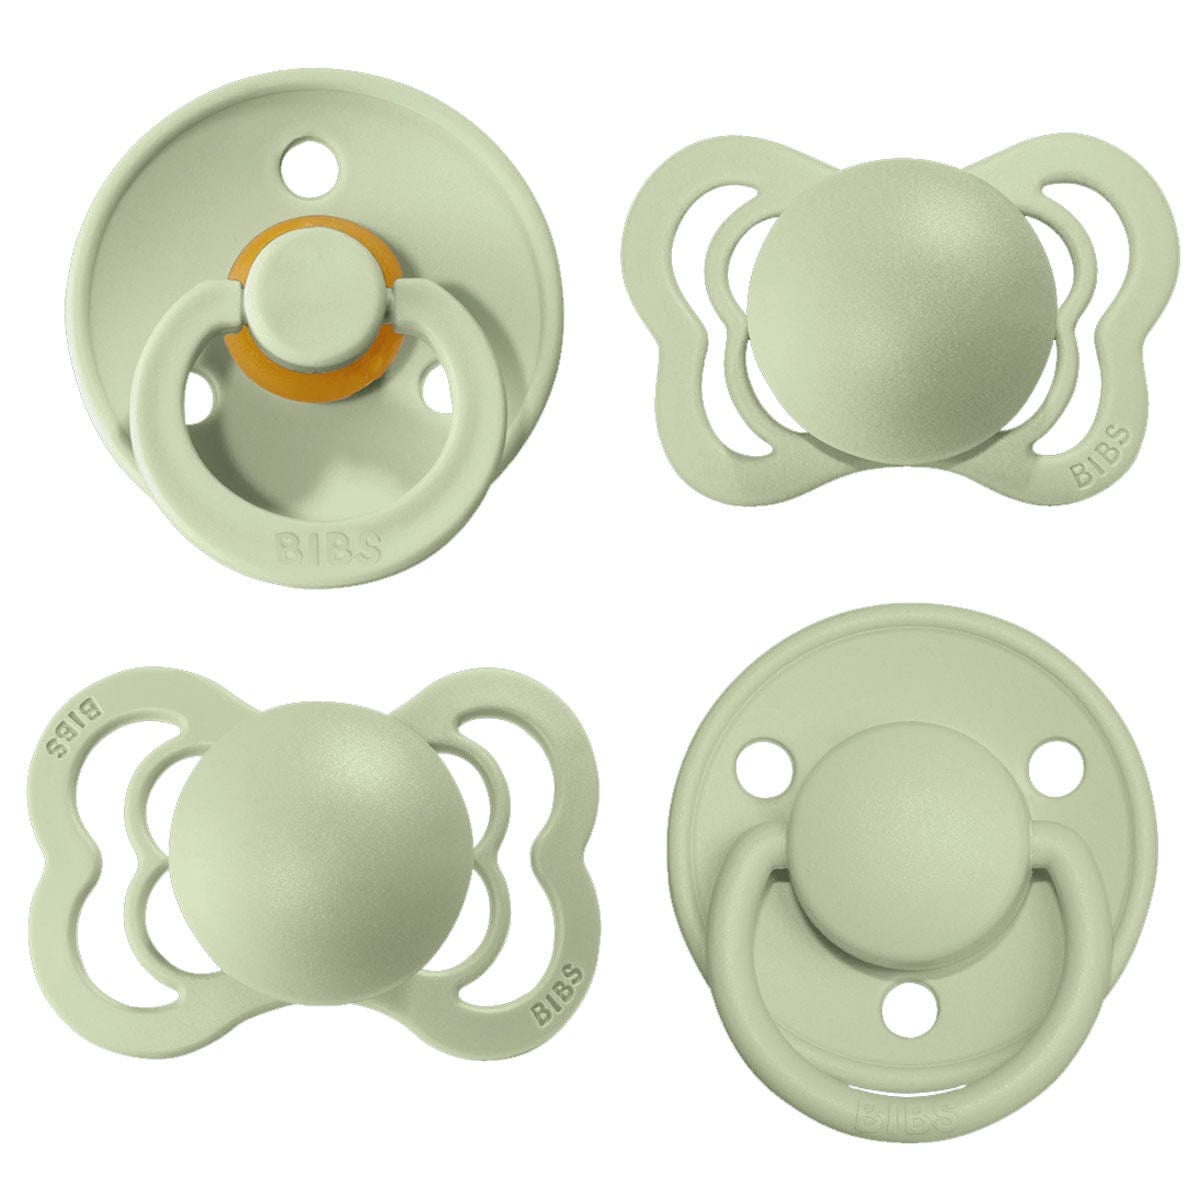 BIBS Pacifiers pacifiers Sage BIBS Pacifiers Try-It Collection